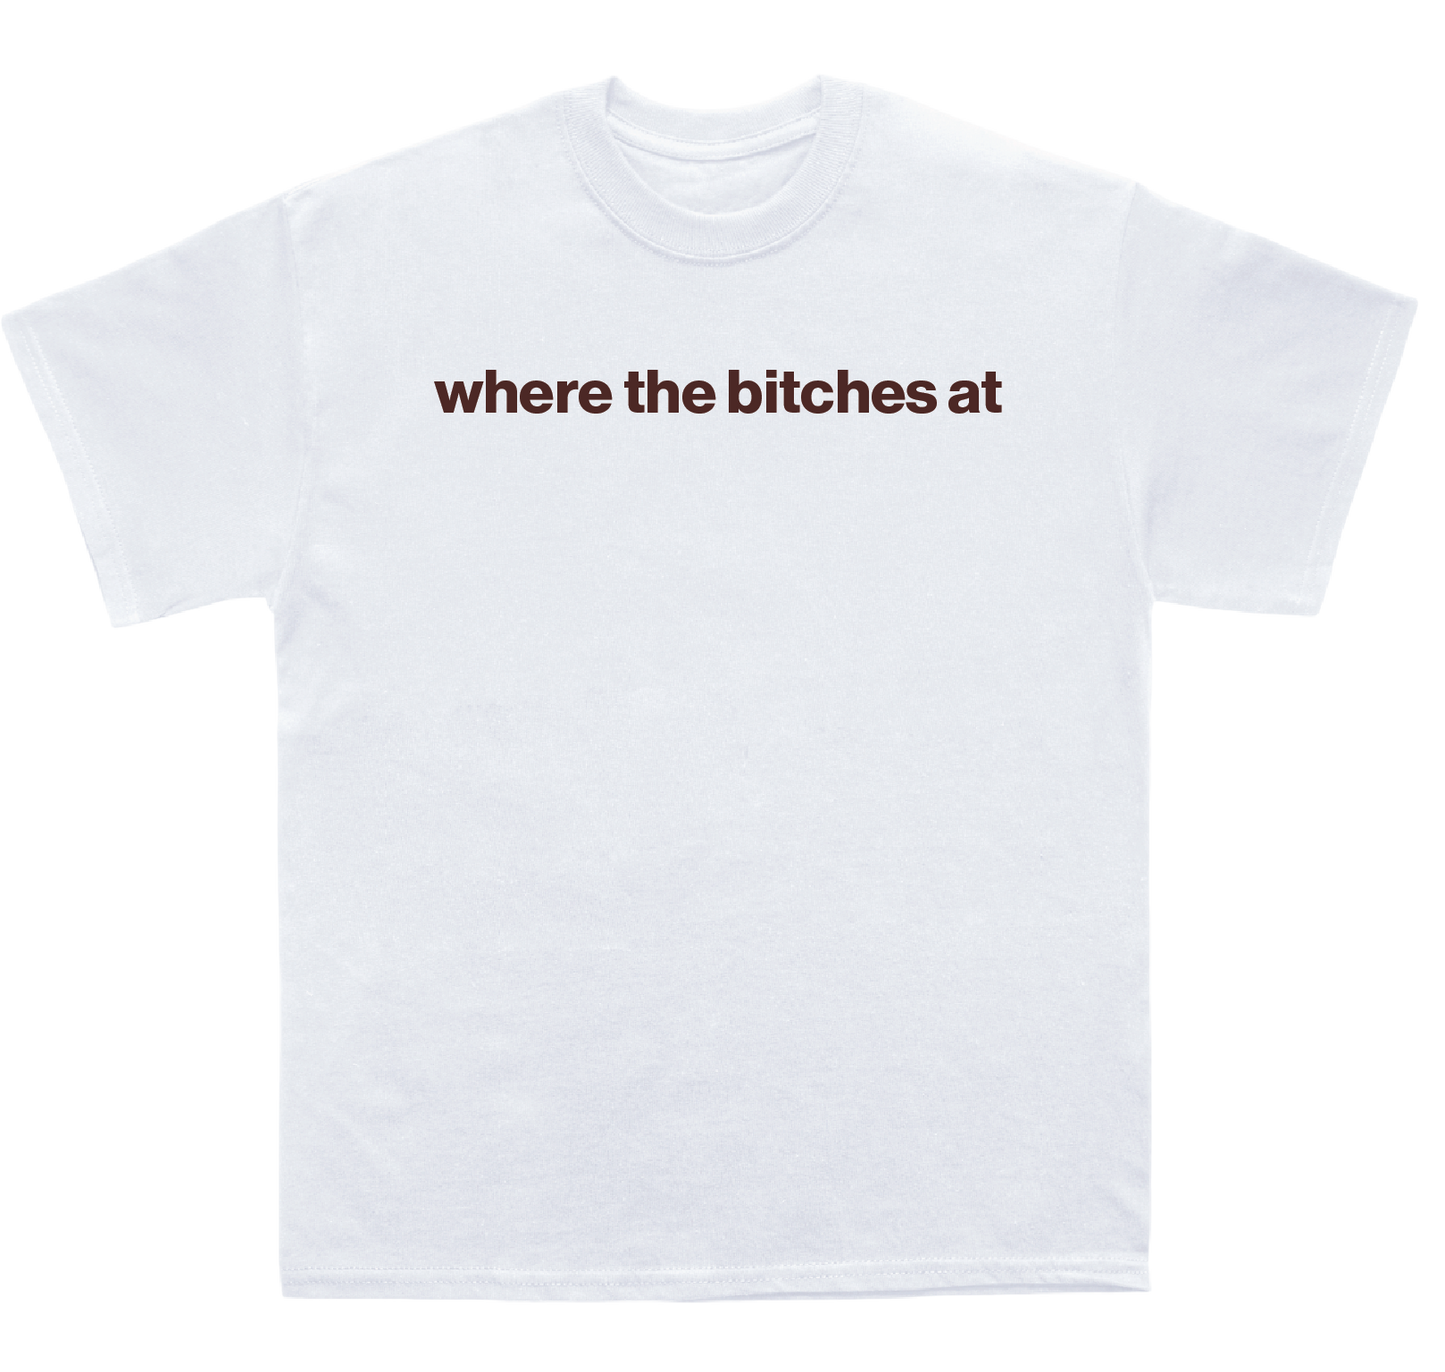 where the bitches at shirt